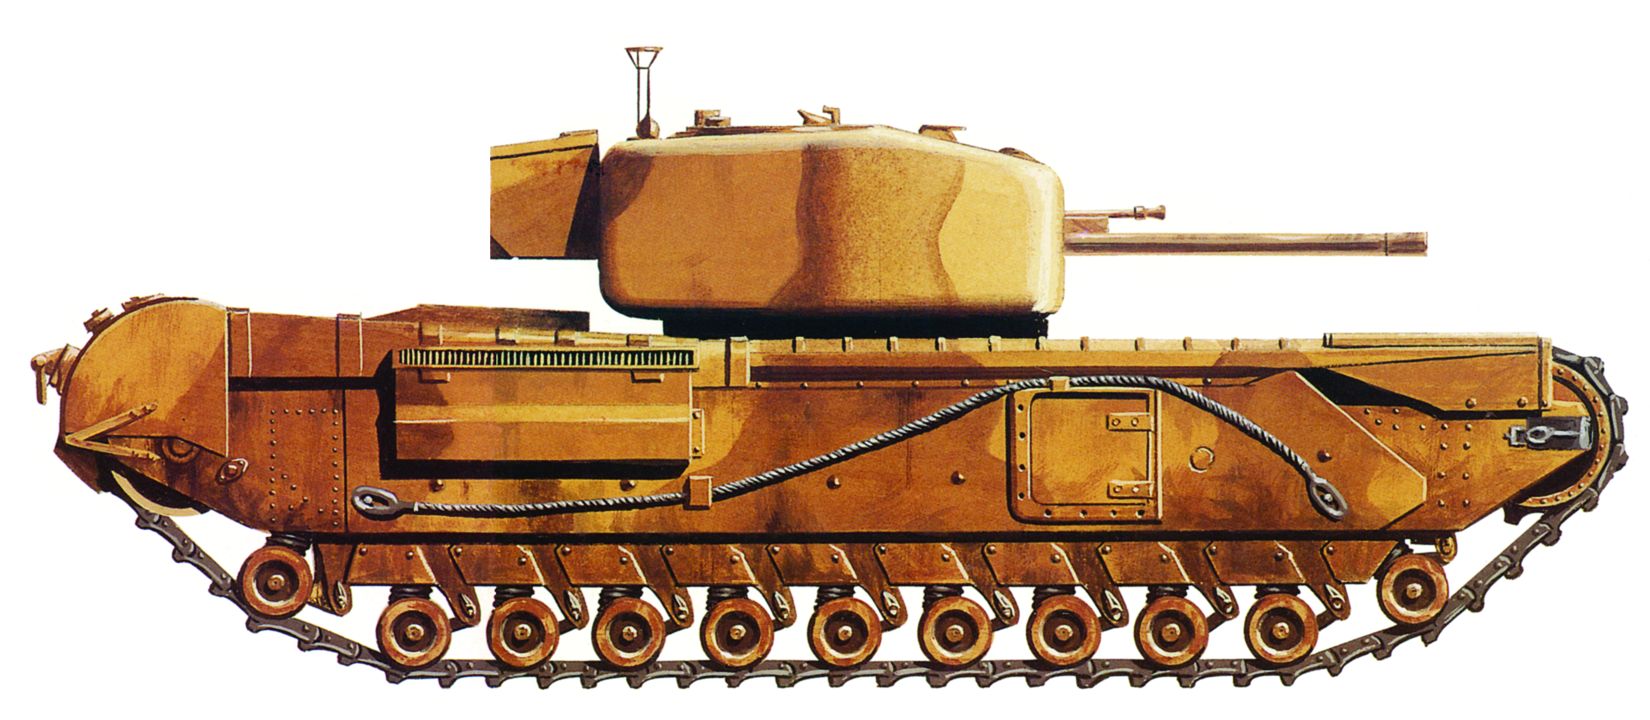 The Mk IV, a later version of the Churchill tank, offered a few improvements over the original design. In this rendering, the numerous small wheels of the tank’s drive train are clearly visible.